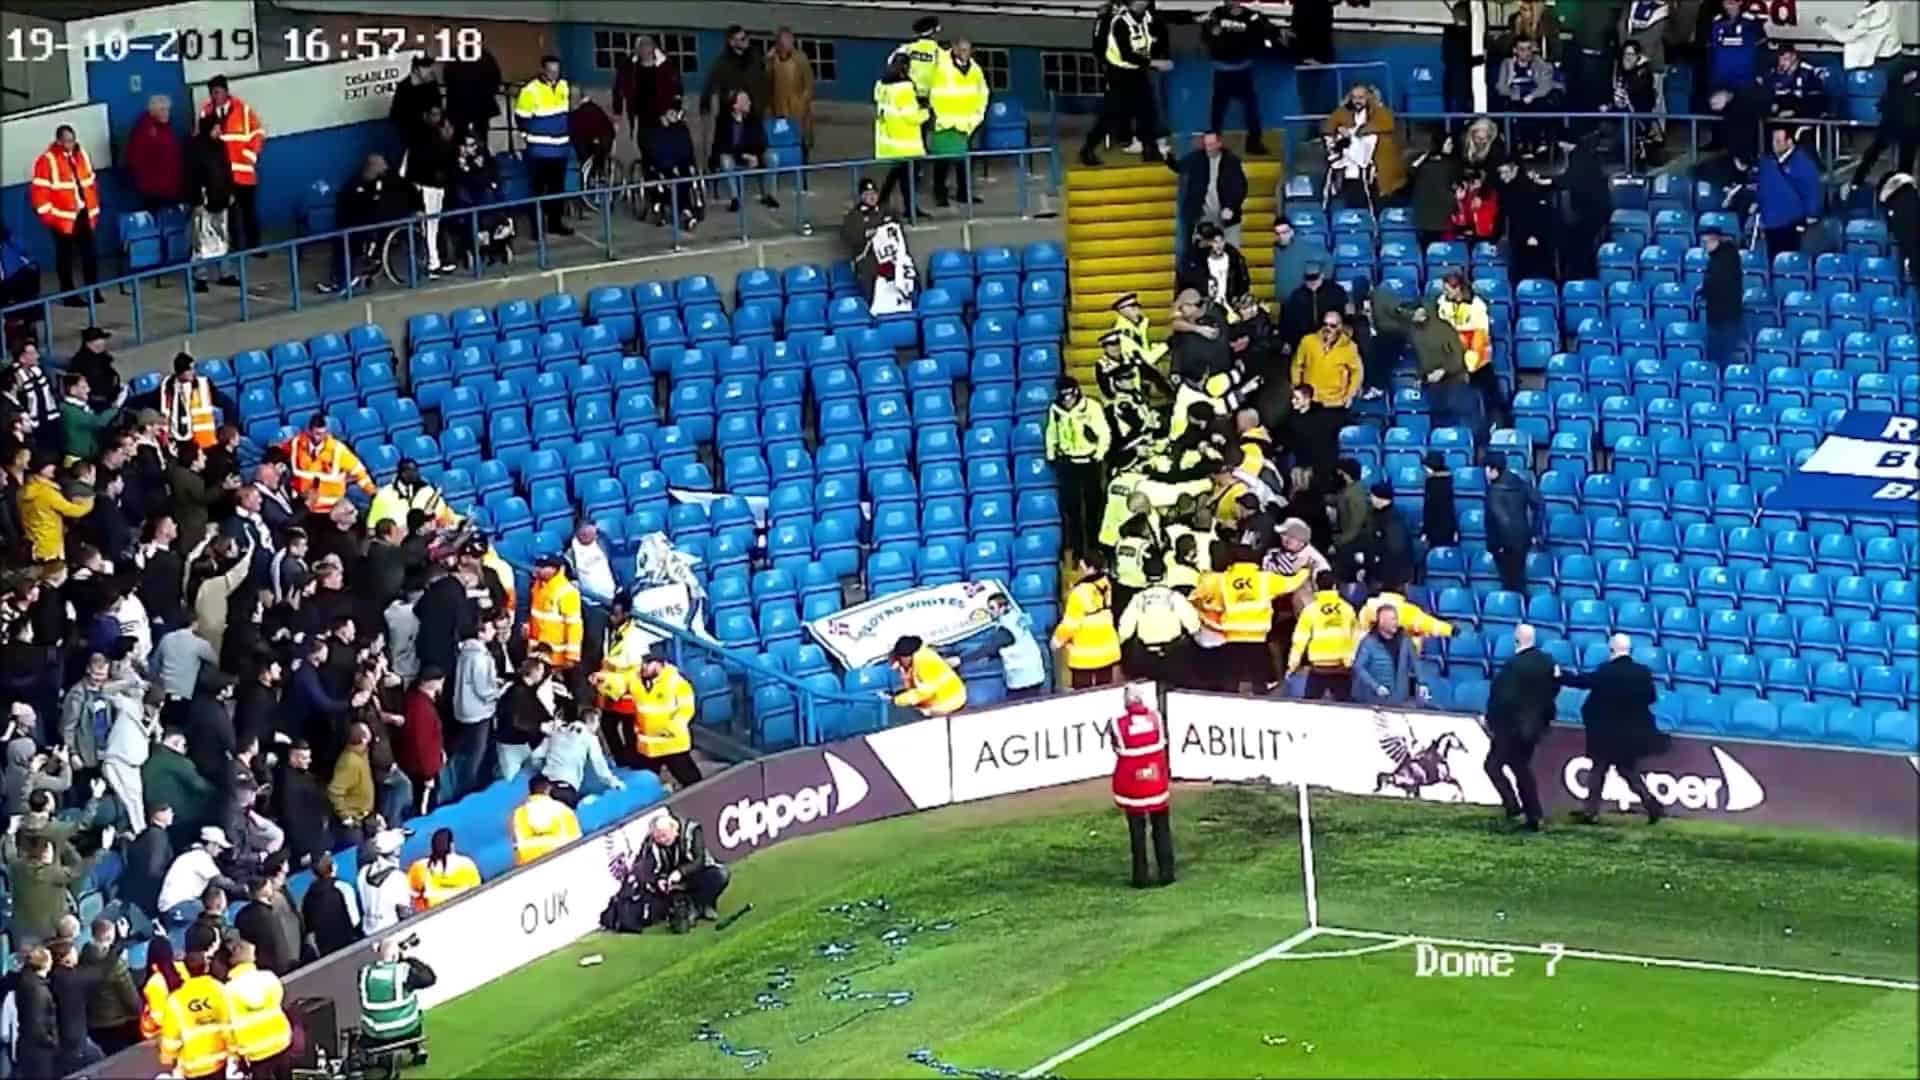 Video – Leeds United & Birmingham City supporters jailed for ‘worst violence seen in a decade’